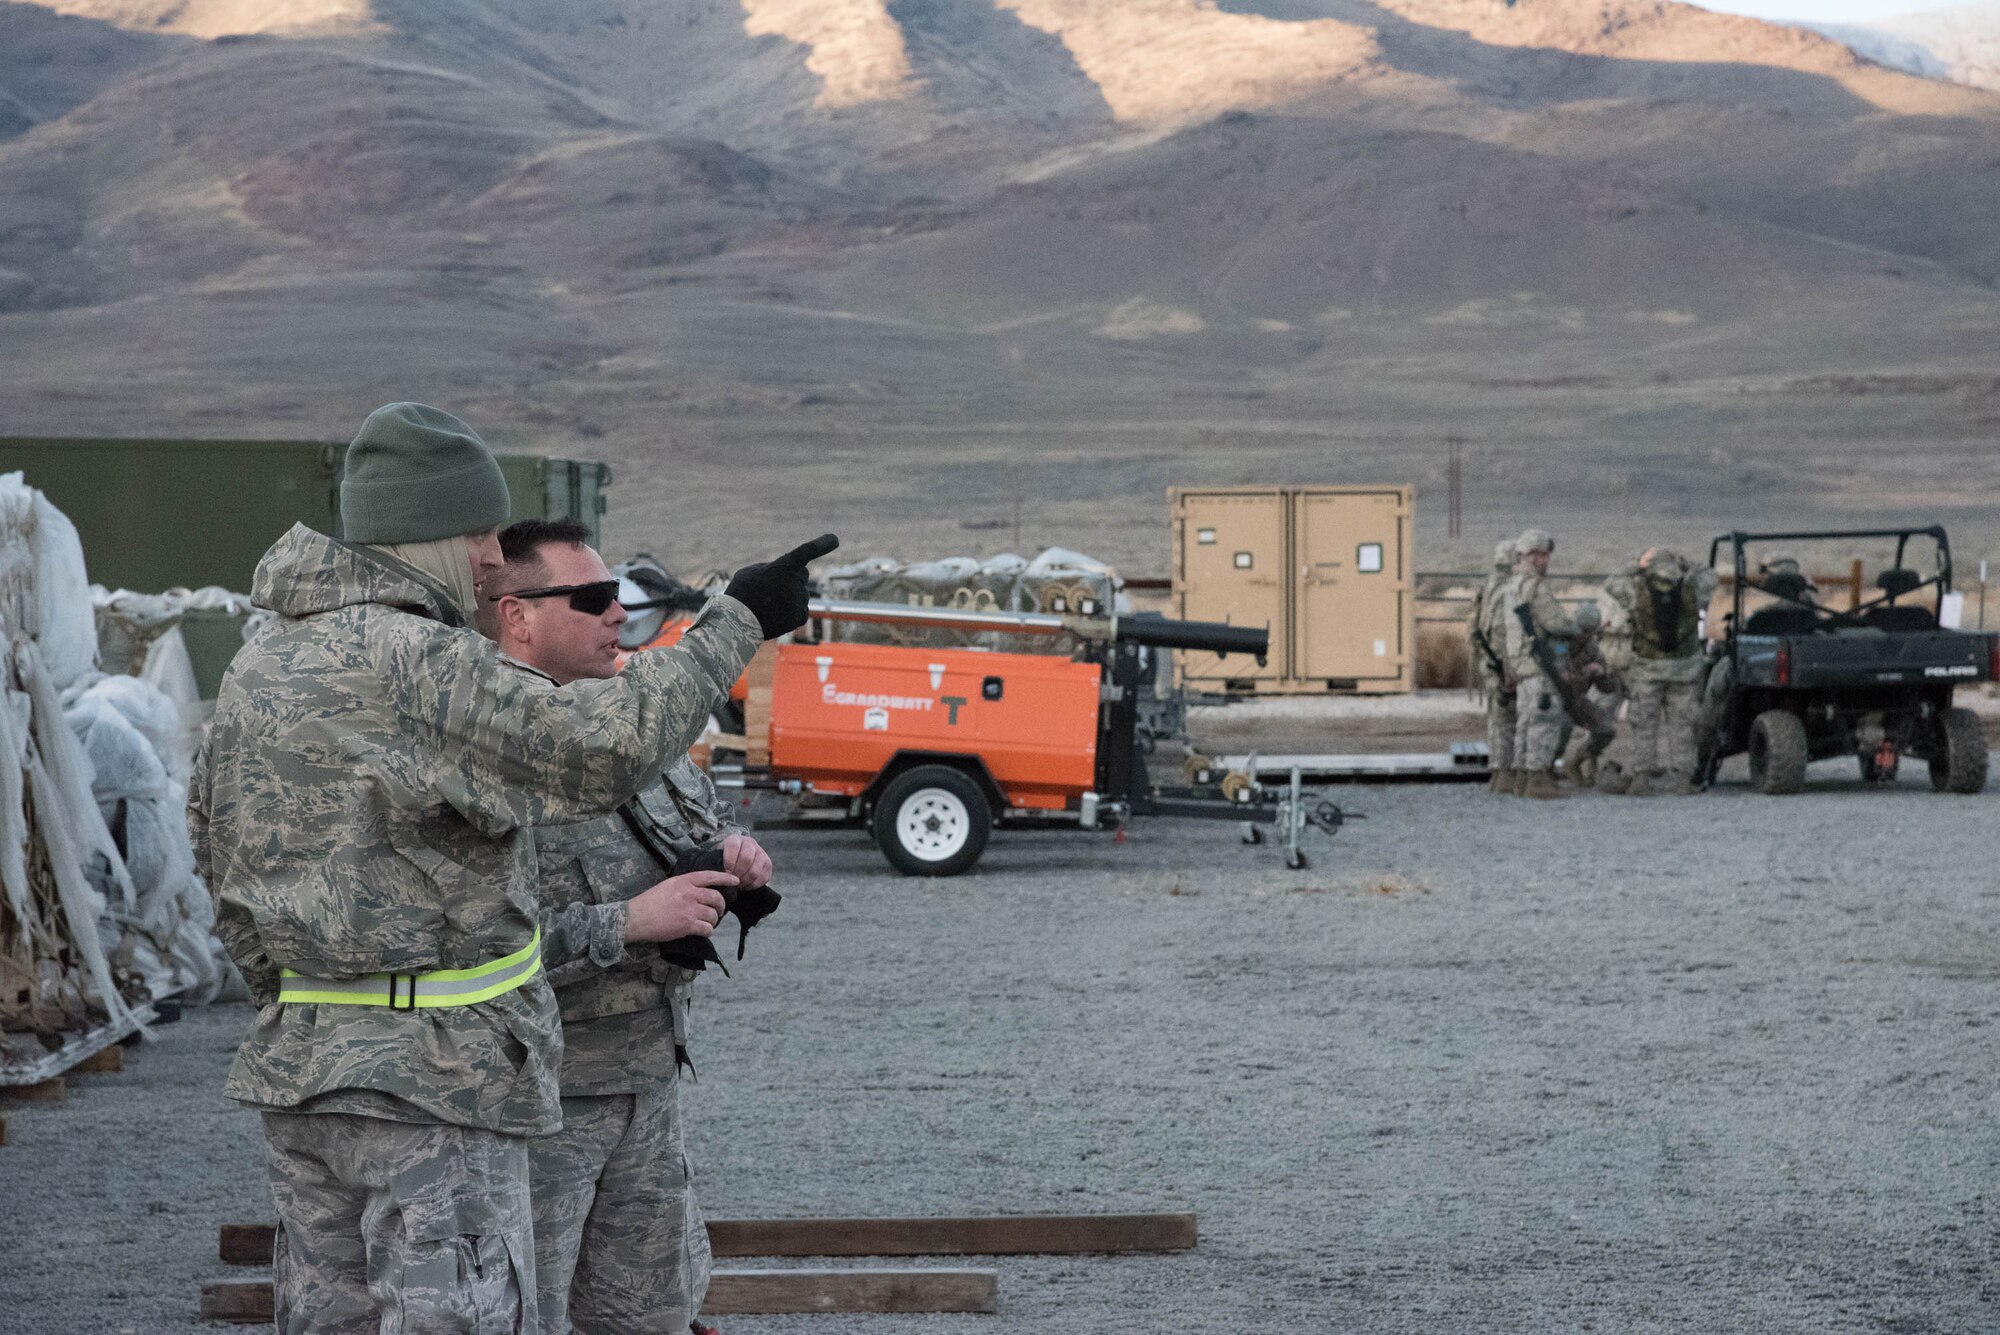 Airmen from the Kentucky Air National Guard’s 123rd Contingency Response Group discuss the movement of equipment delivered by airlift to Amedee Army Airfield, Calif., March 7, 2016. 123rd CRG is working in conjunction with the U.S. Army’s 688th Rapid Port Opening Element and a team from the Defense Logistics Agency to operate Joint Task Force-Port Opening Sangala during a week-long exercise called Operation Lumberjack. The objective of the JTF-PO is to establish an aerial port of debarkation, provide initial distribution capability and set up warehousing for distribution beyond a forward node. (Kentucky Air National Guard photo by 1st Lt. James Killen)